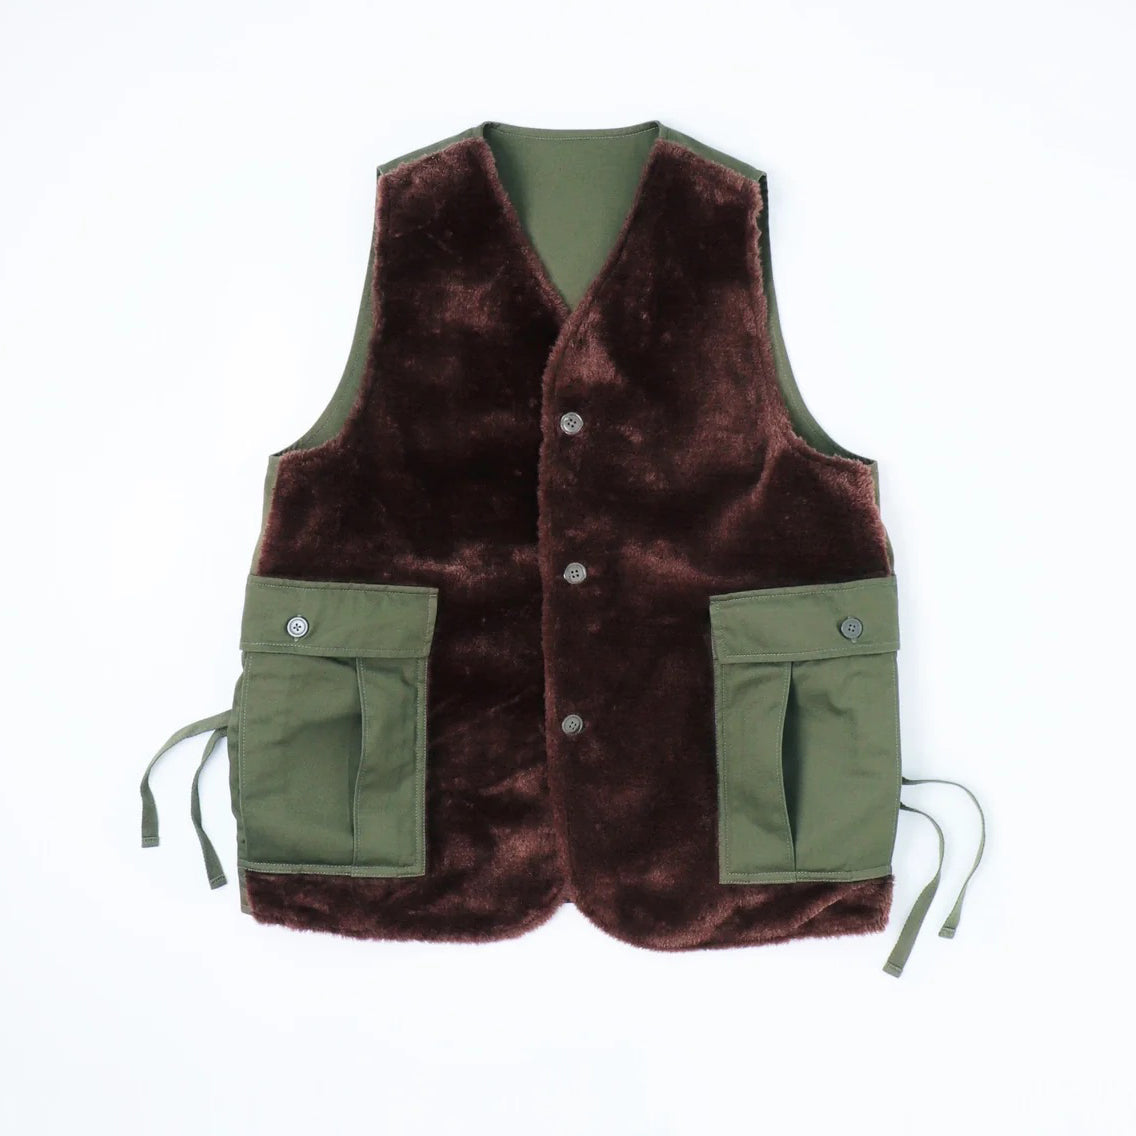 No:#611 | Name:FW23-REVERSIBLE G1 VEST | Color:Green | Size:M/L【WORKWARE】